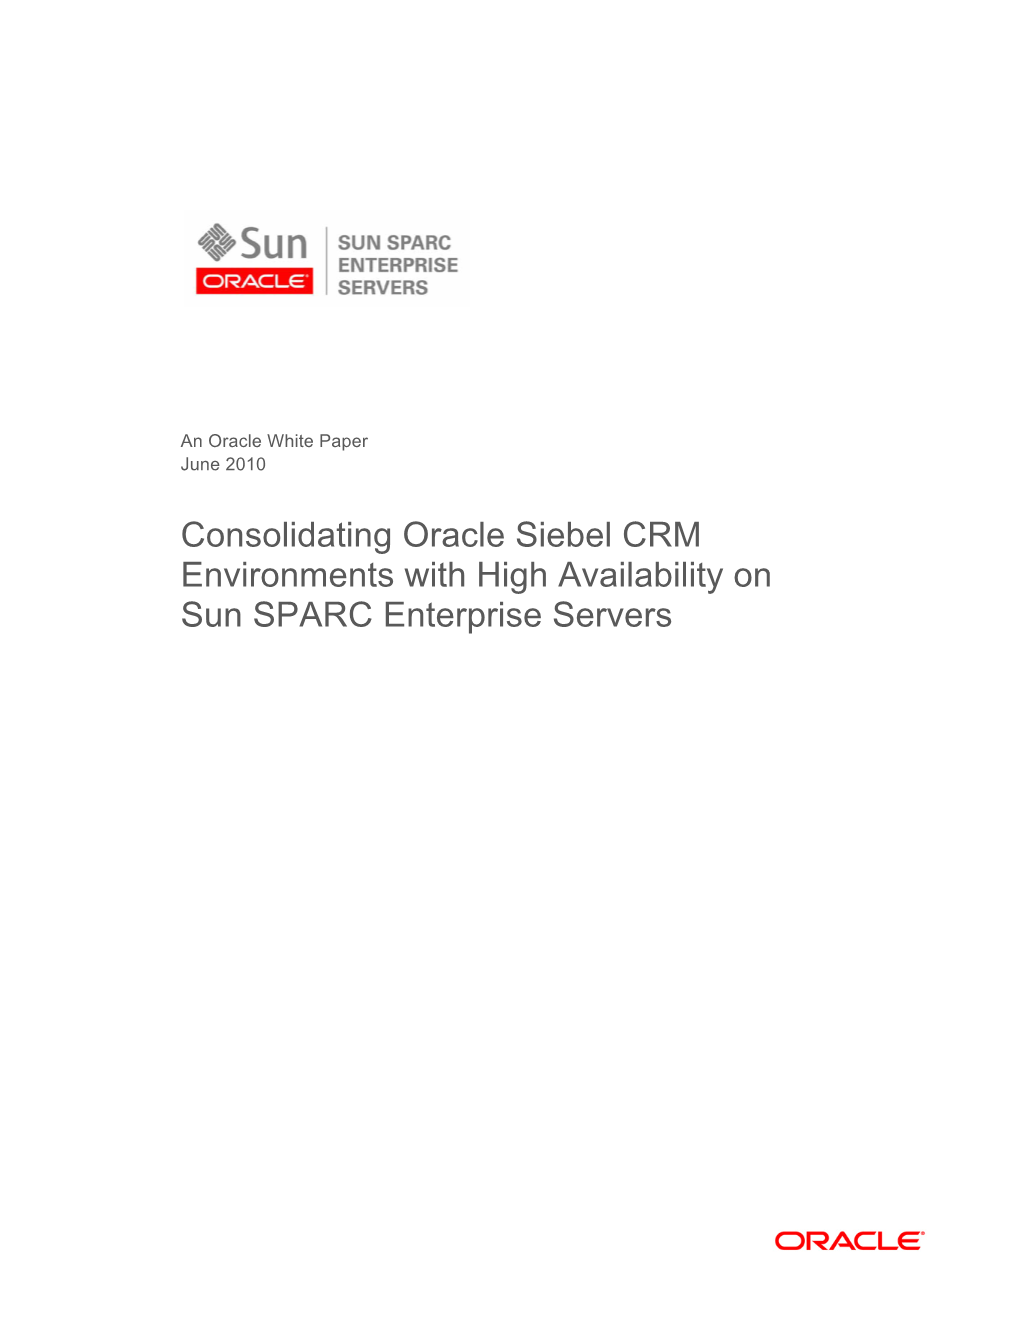 Consolidating Oracle Siebel CRM Environments with High Availability on Sun SPARC Enterprise Servers